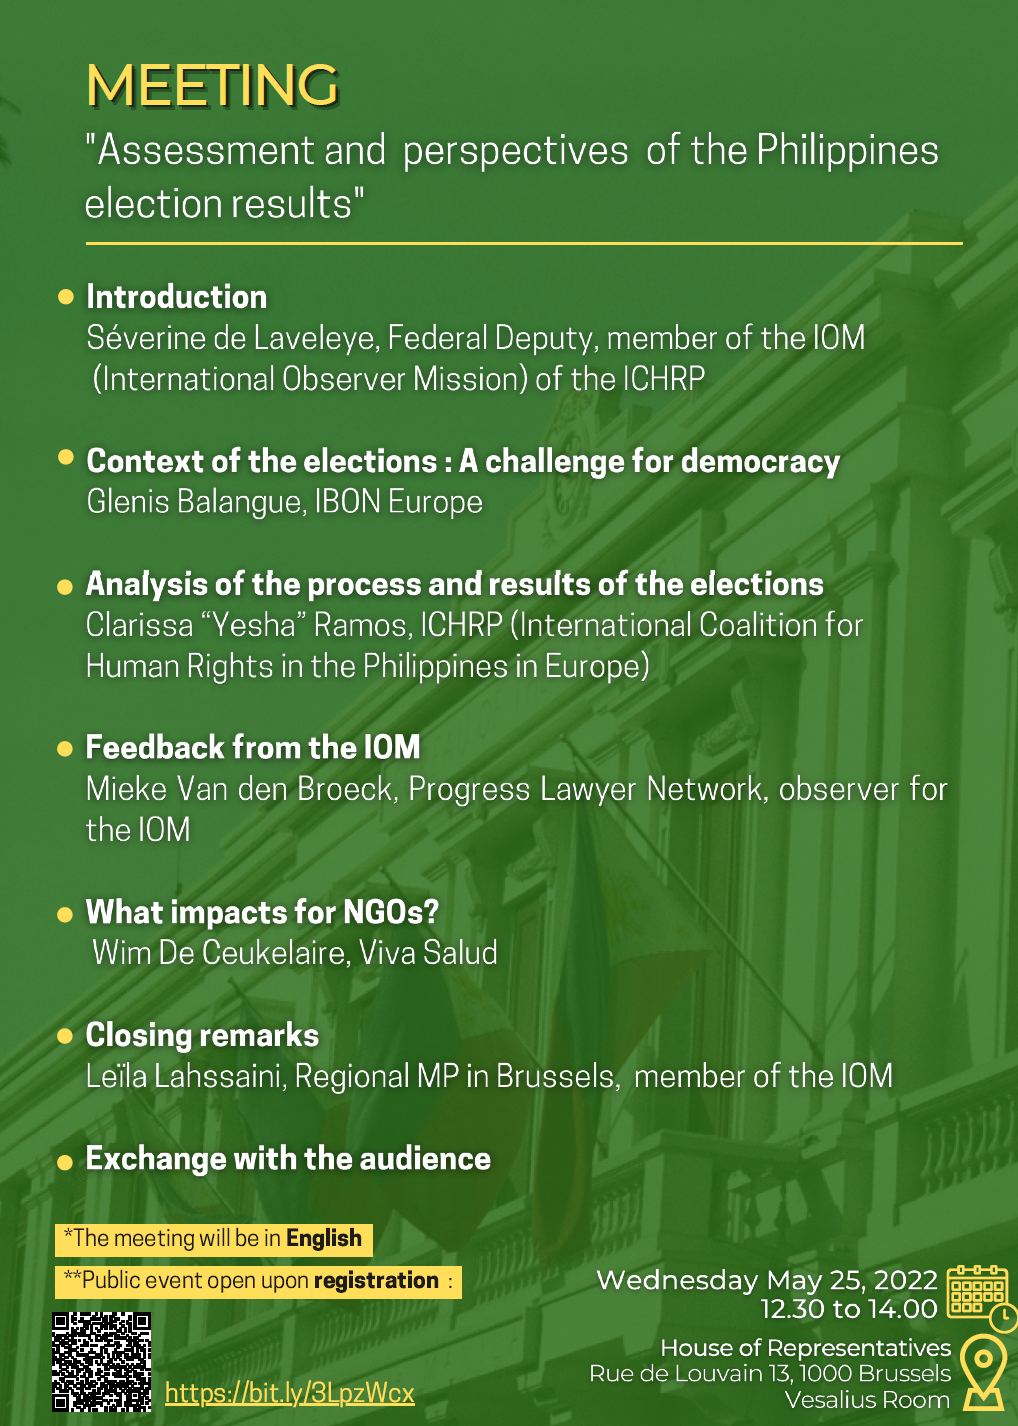 Forum on the Philippine Elections: Results and Prospects [25 May, Belgium]